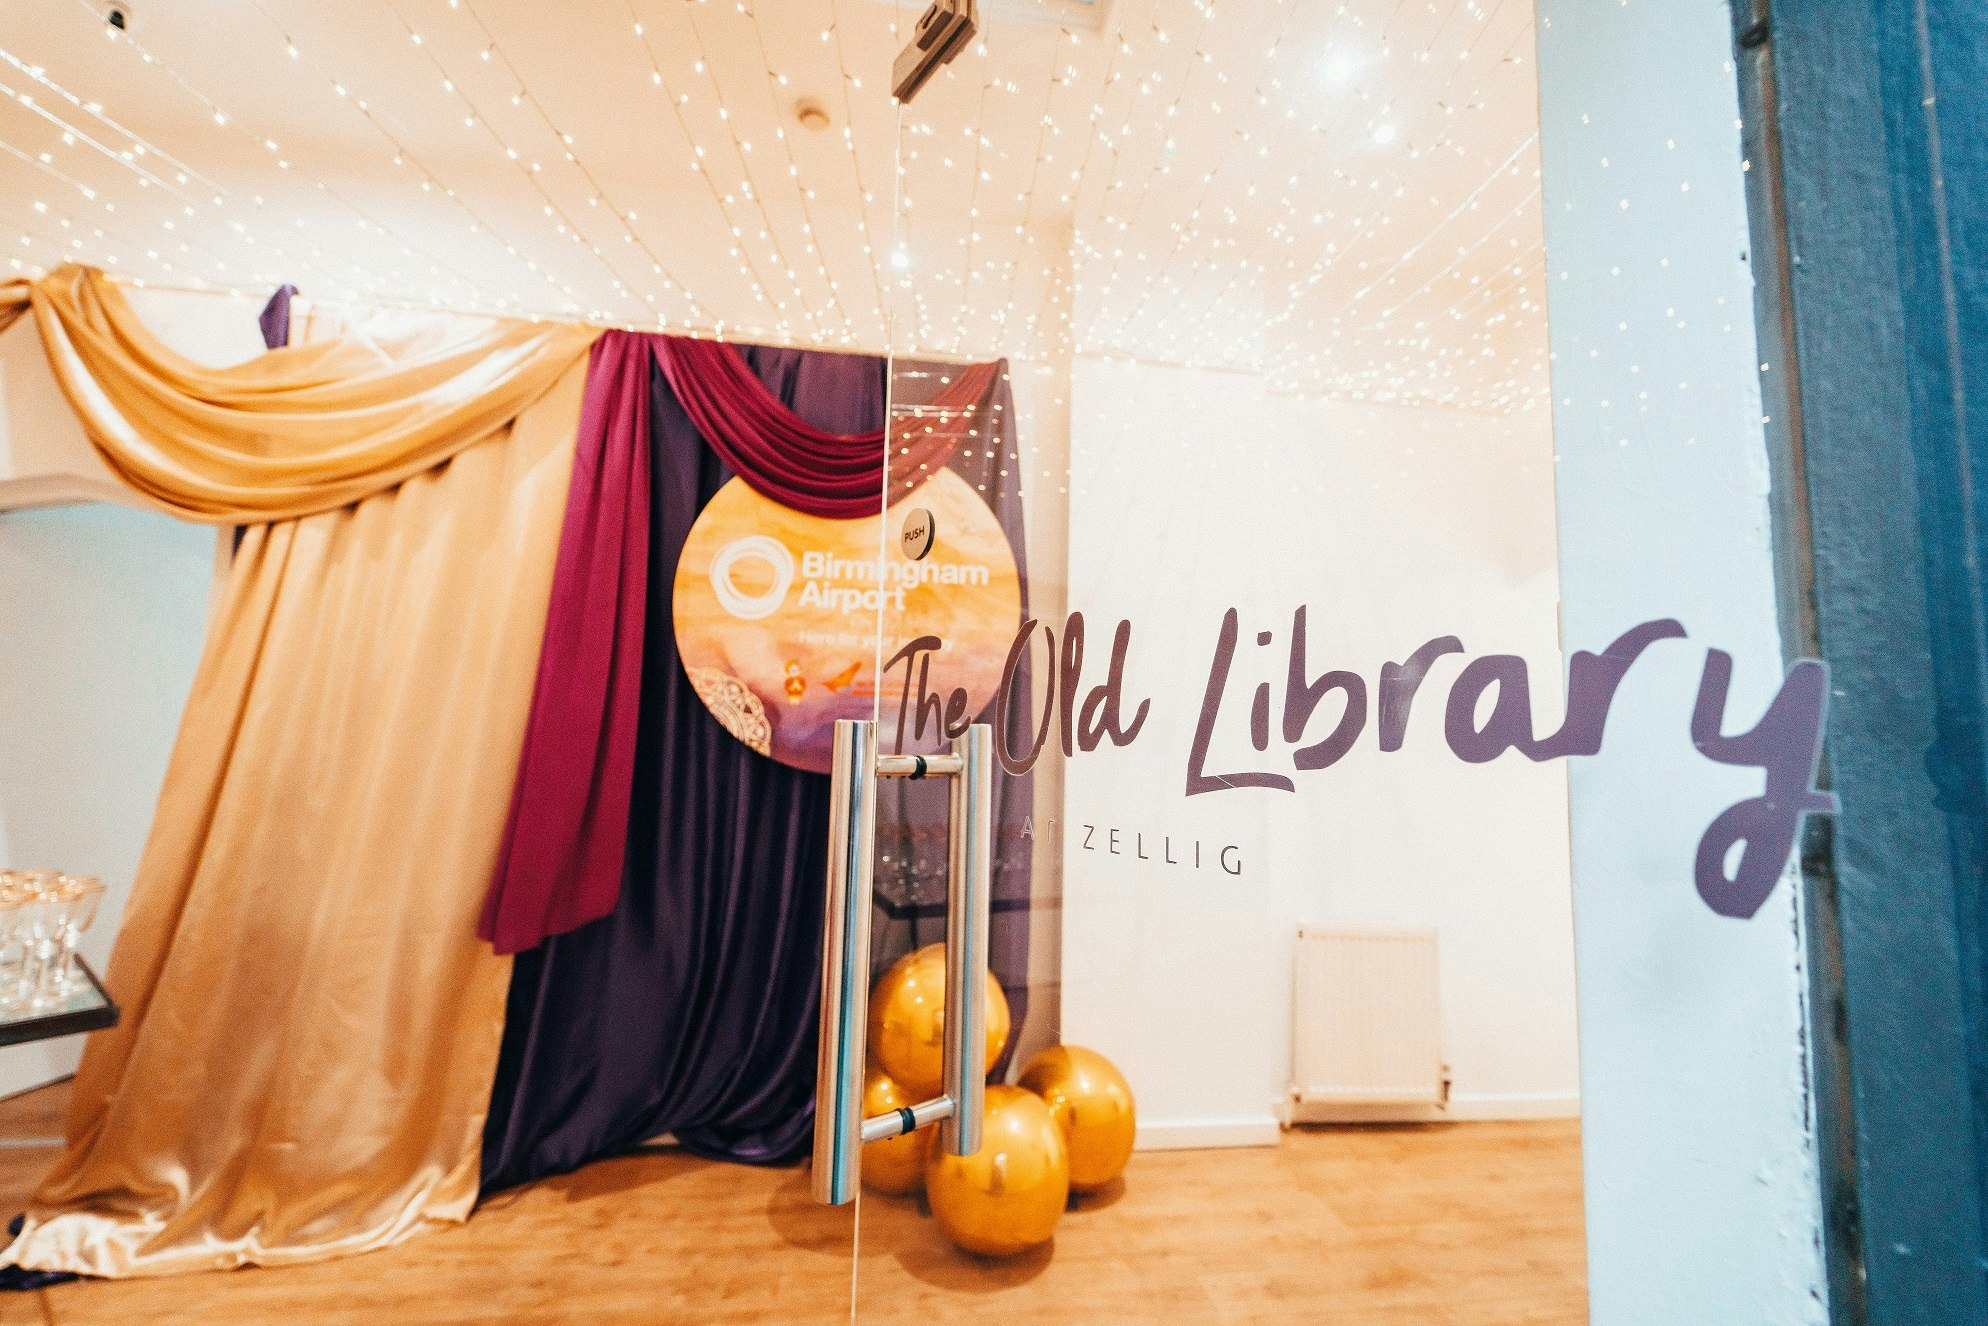 Large Party Venues in Birmingham - The Old Library